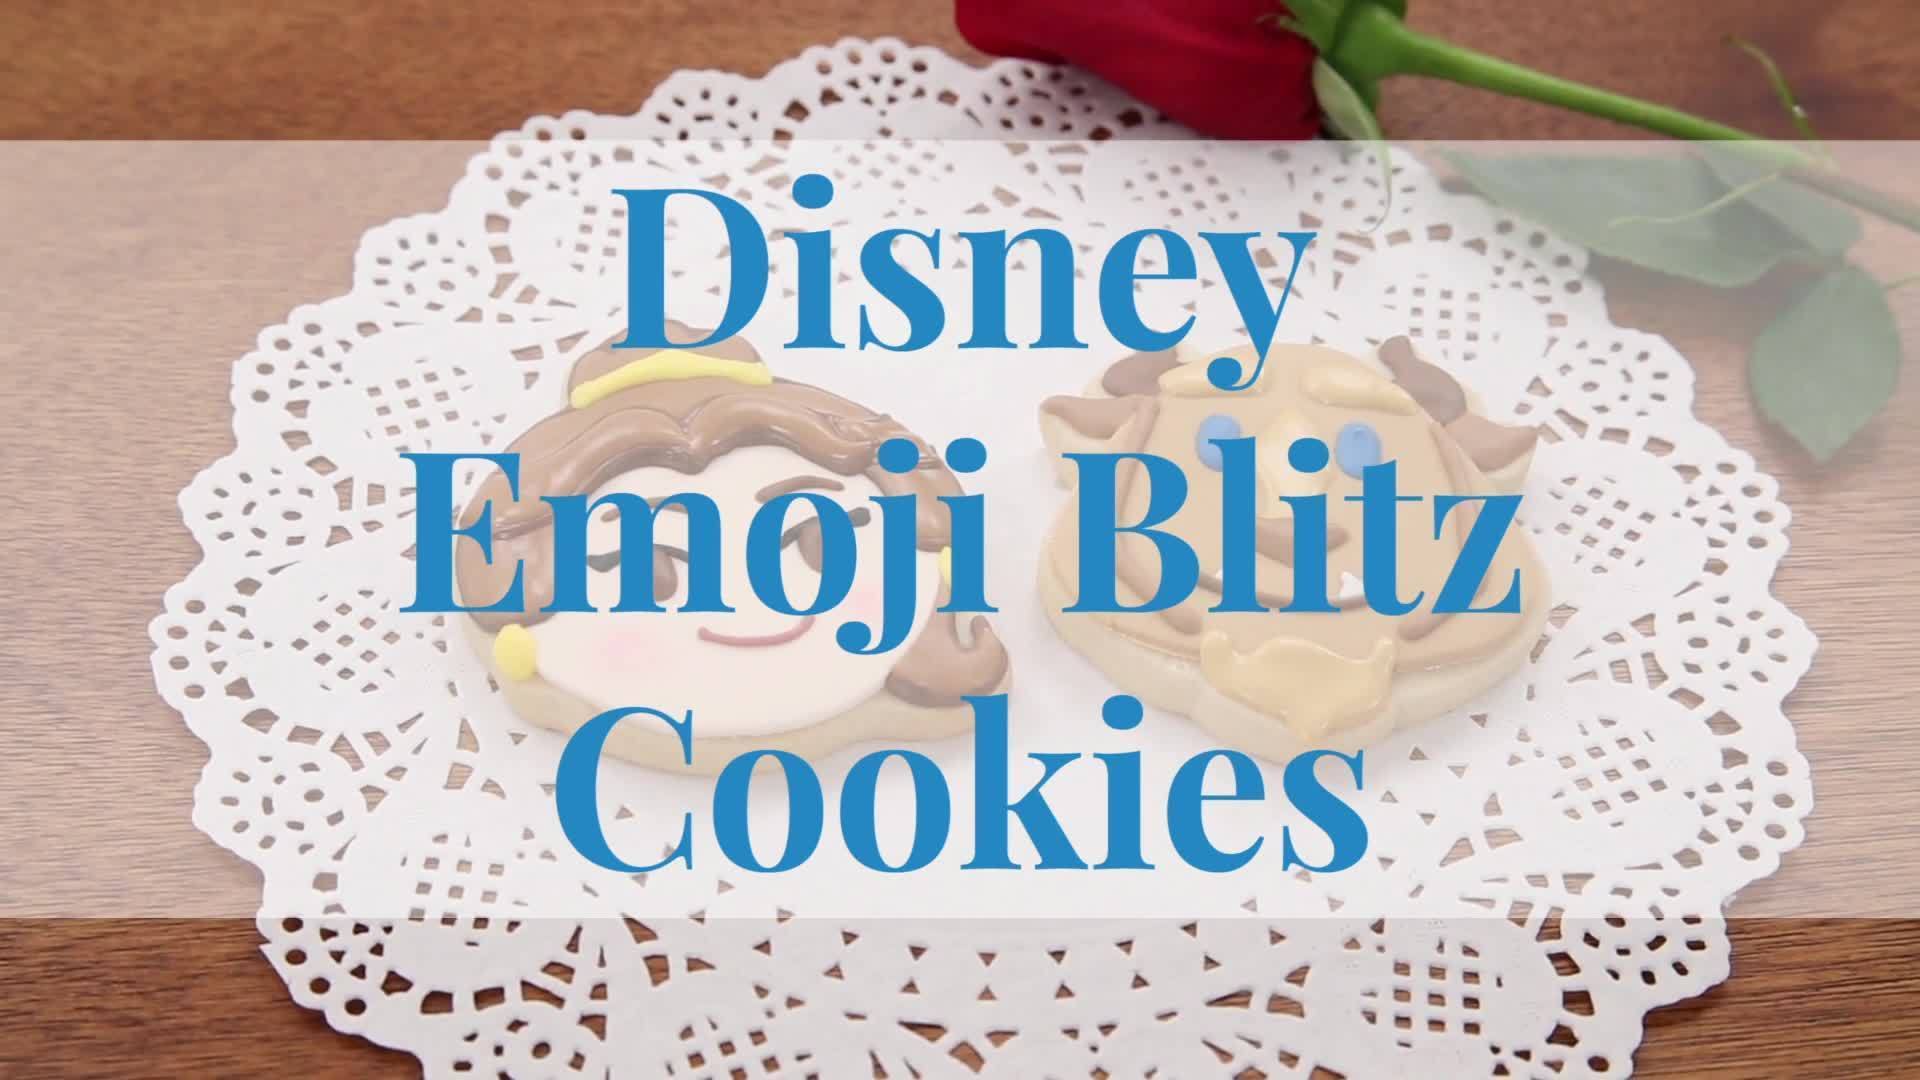 Beauty and the Beast Emoji Blitz | Dishes by Disney